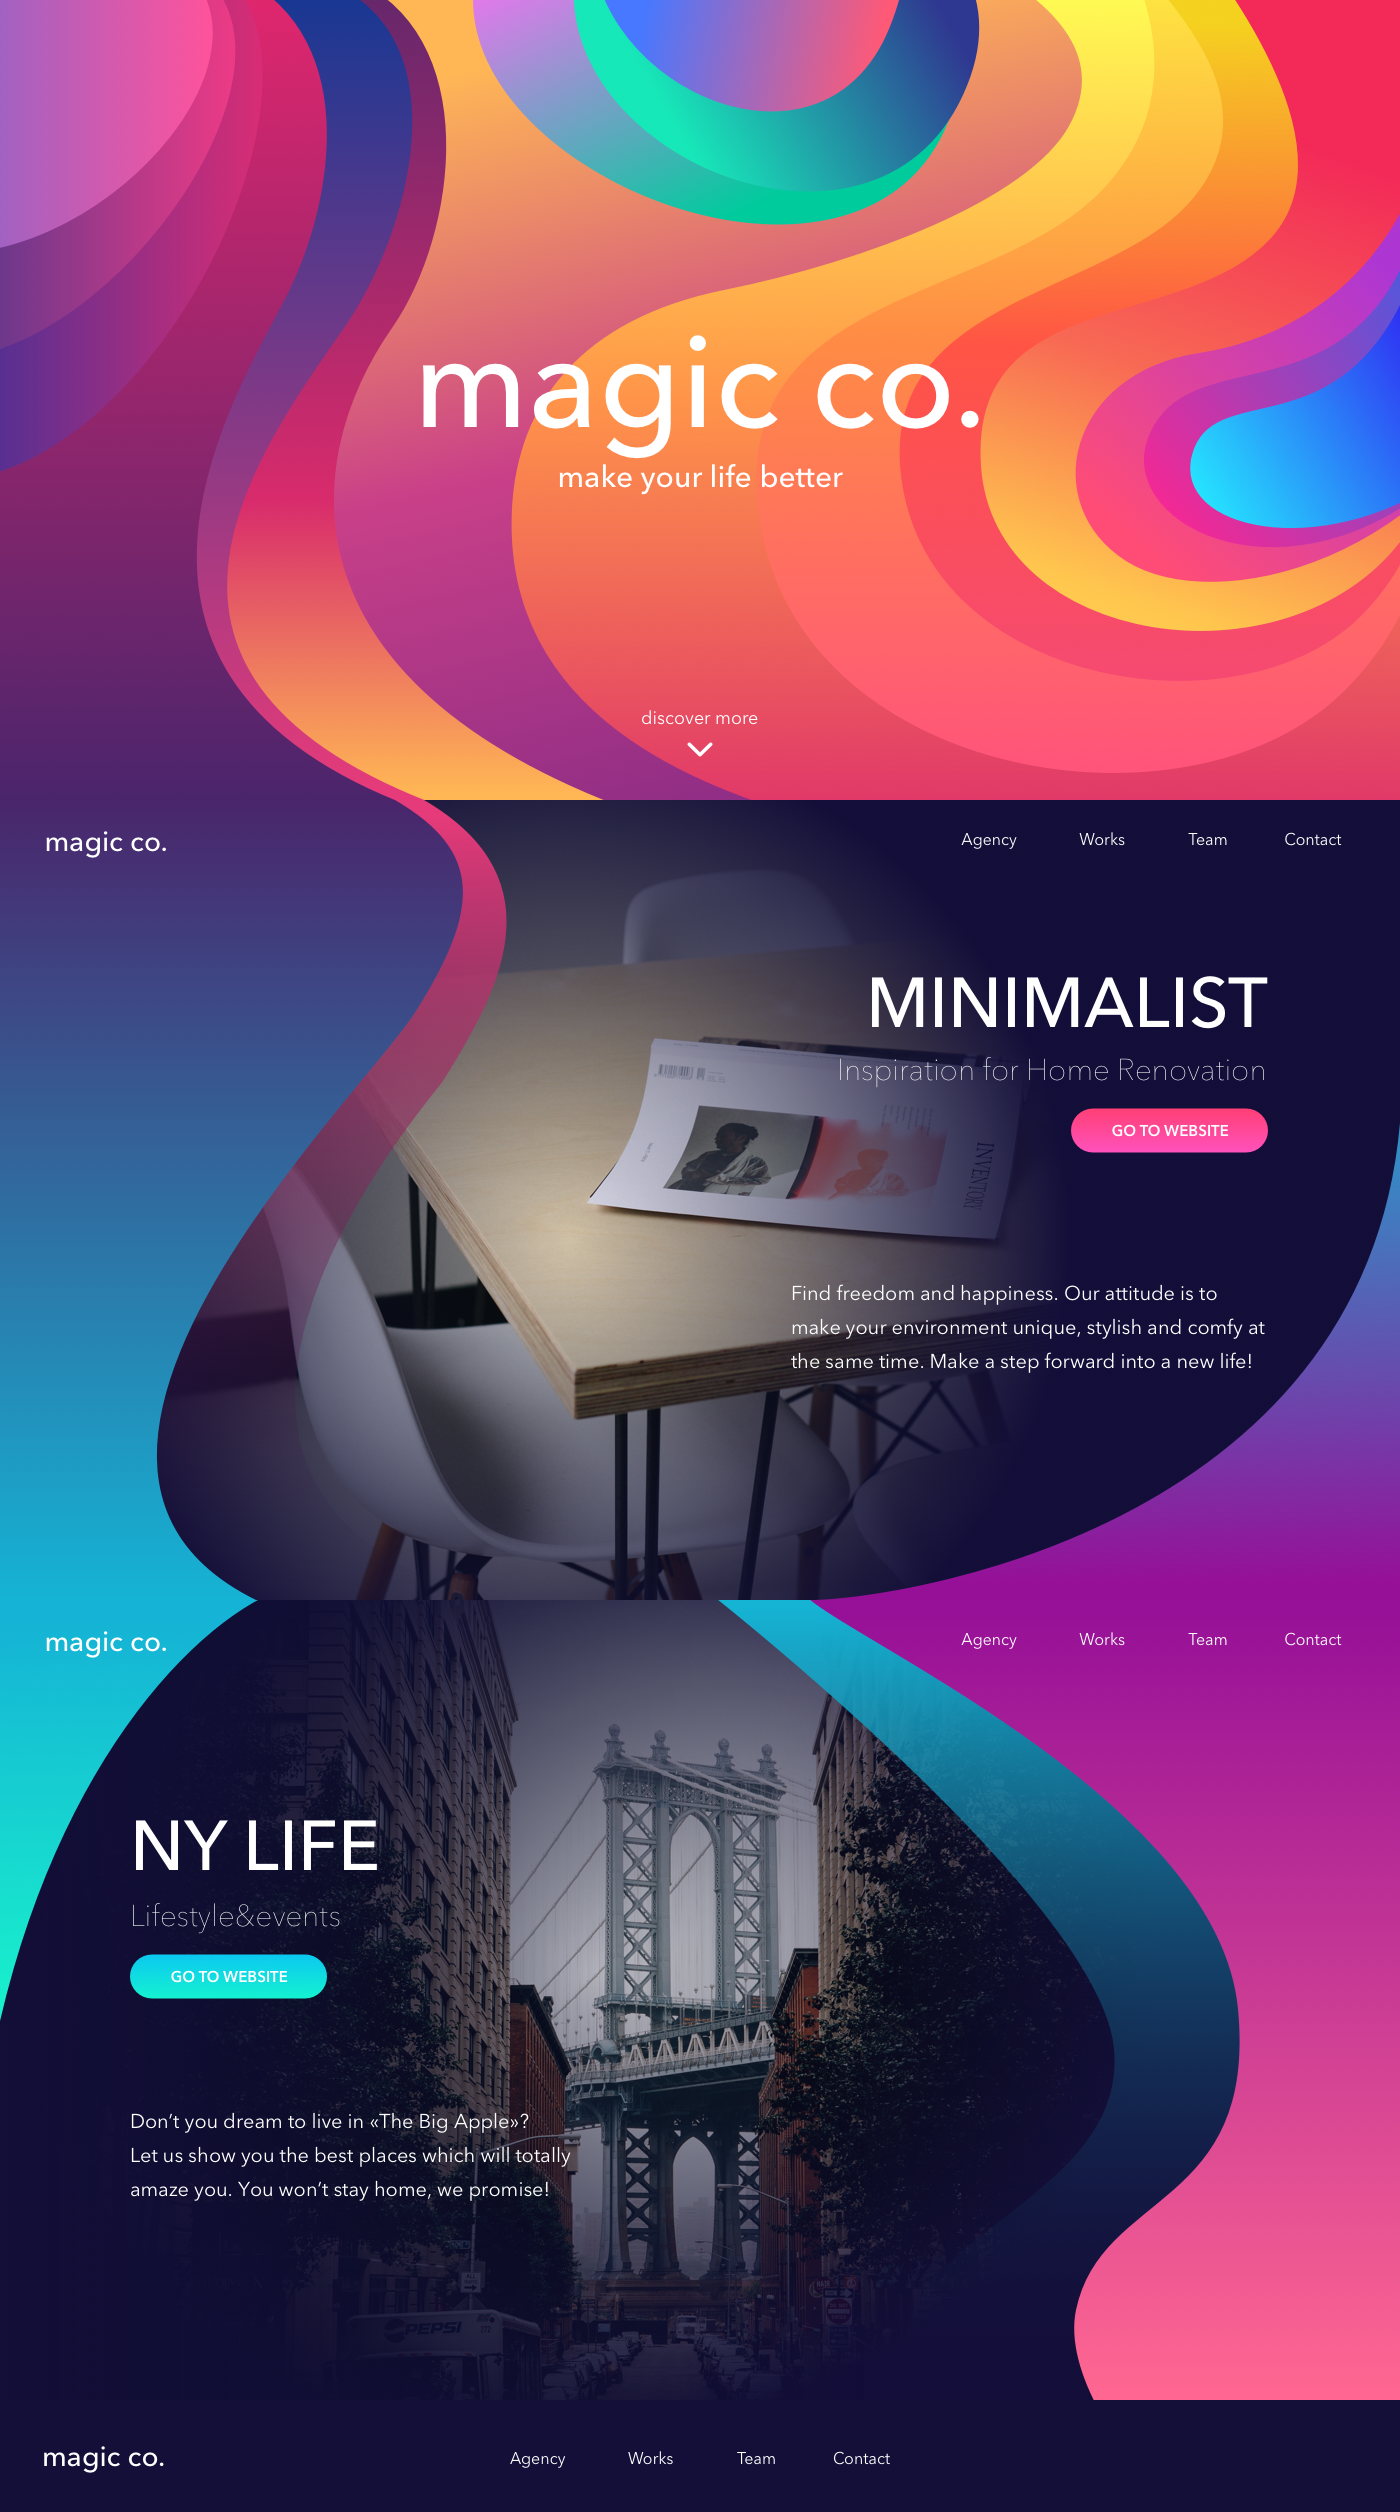 Have you noticed these web design trends in 2018?